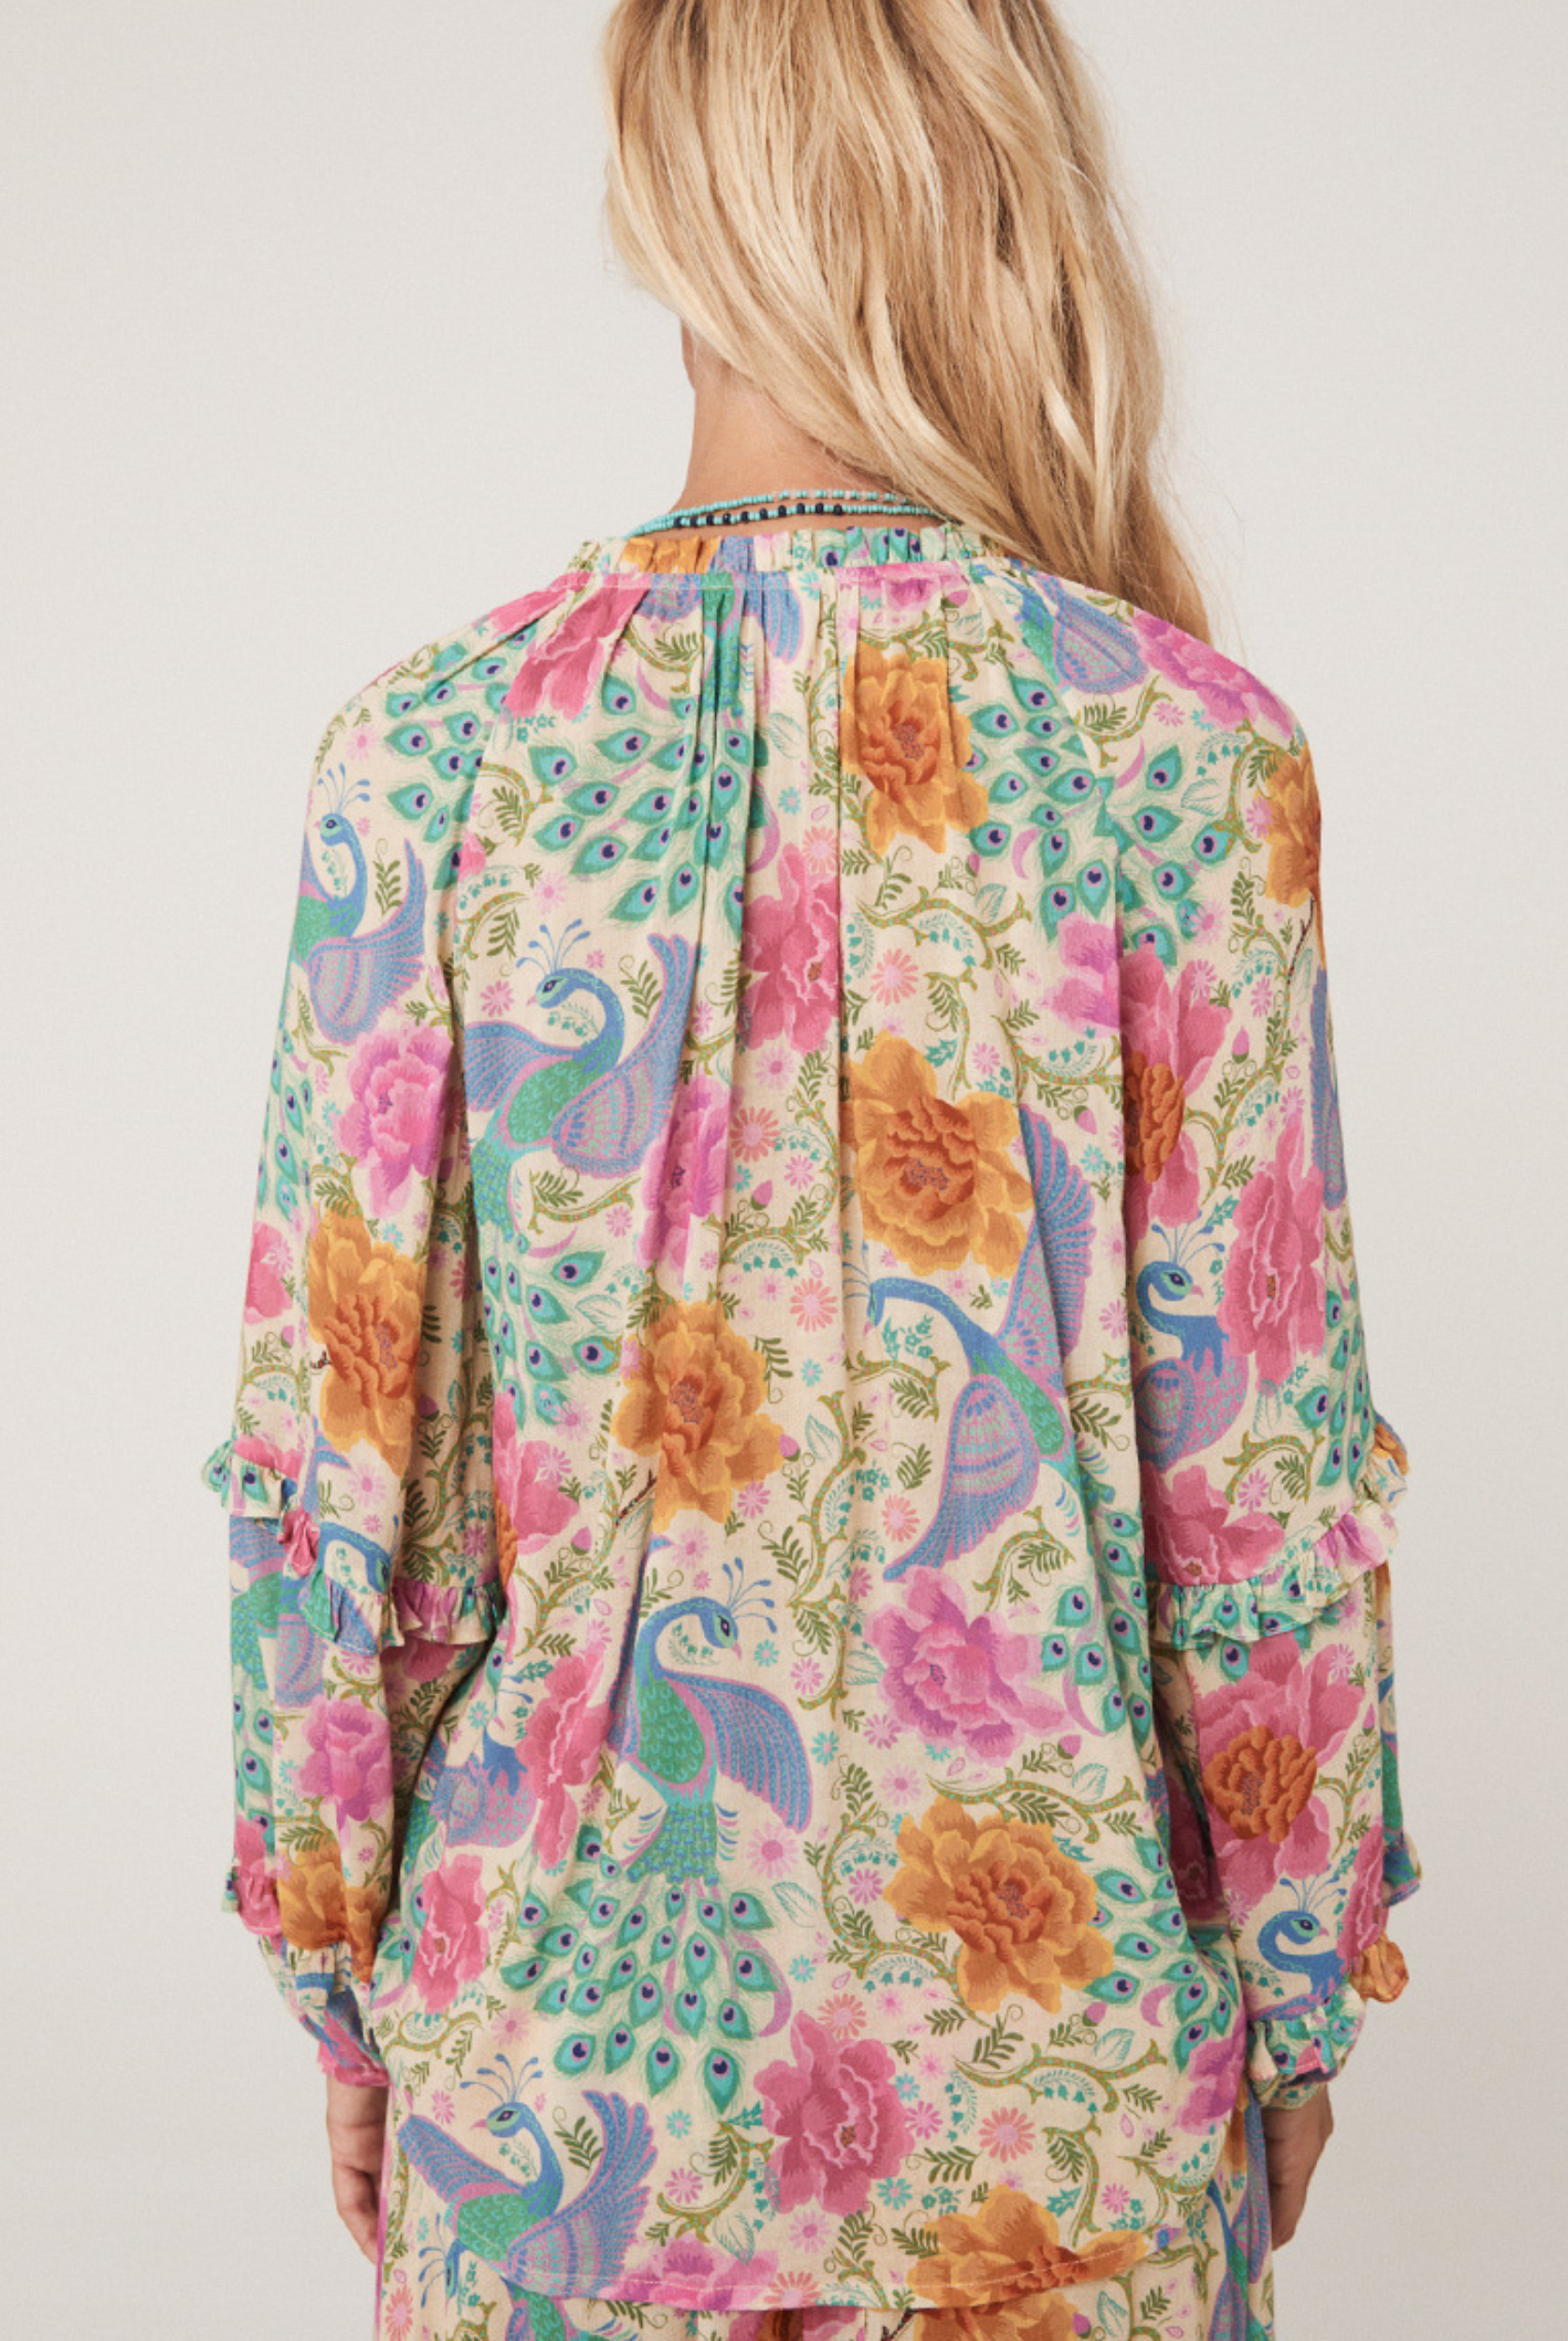 Spell Boheme Blouse in Spring at She Creates Stories